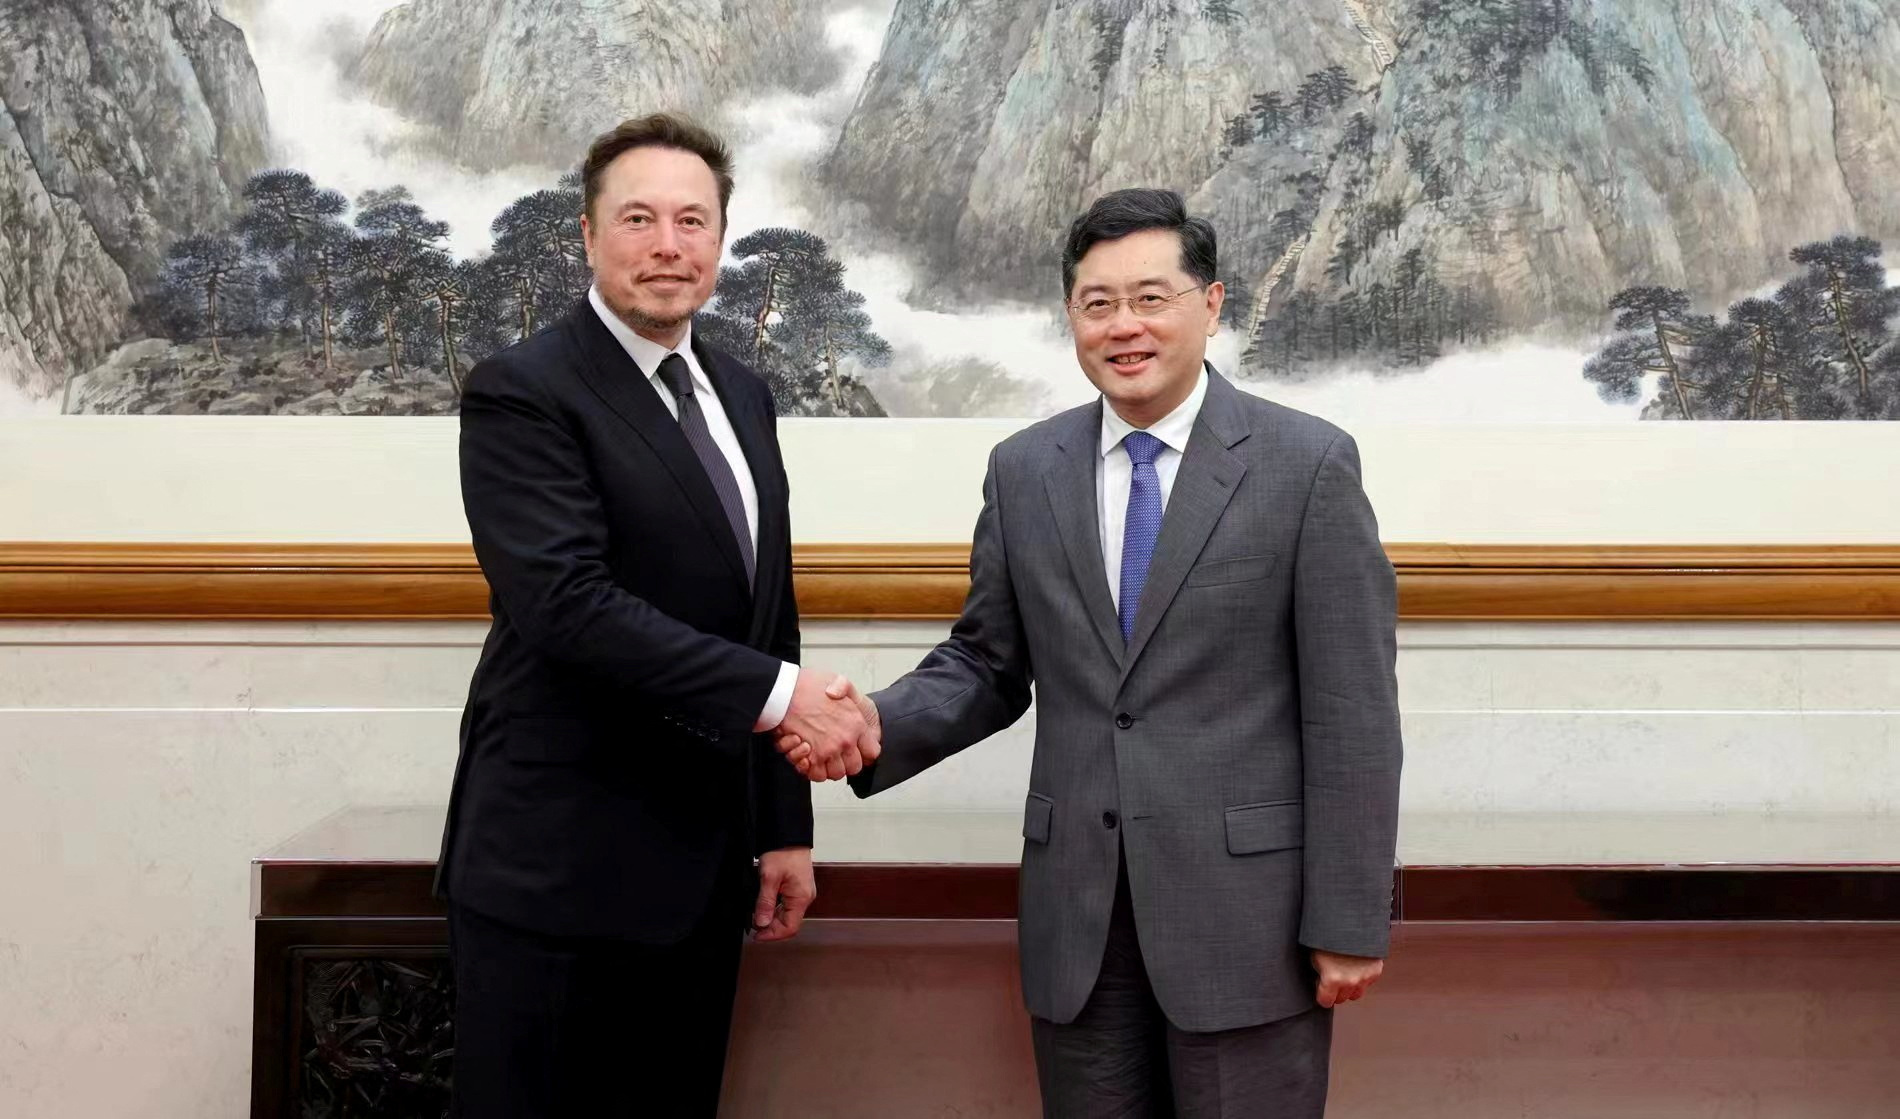 Chinese State Councilor and Foreign Minister Qin Gang meets Tesla Chief Executive Officer Elon Musk in Beijing